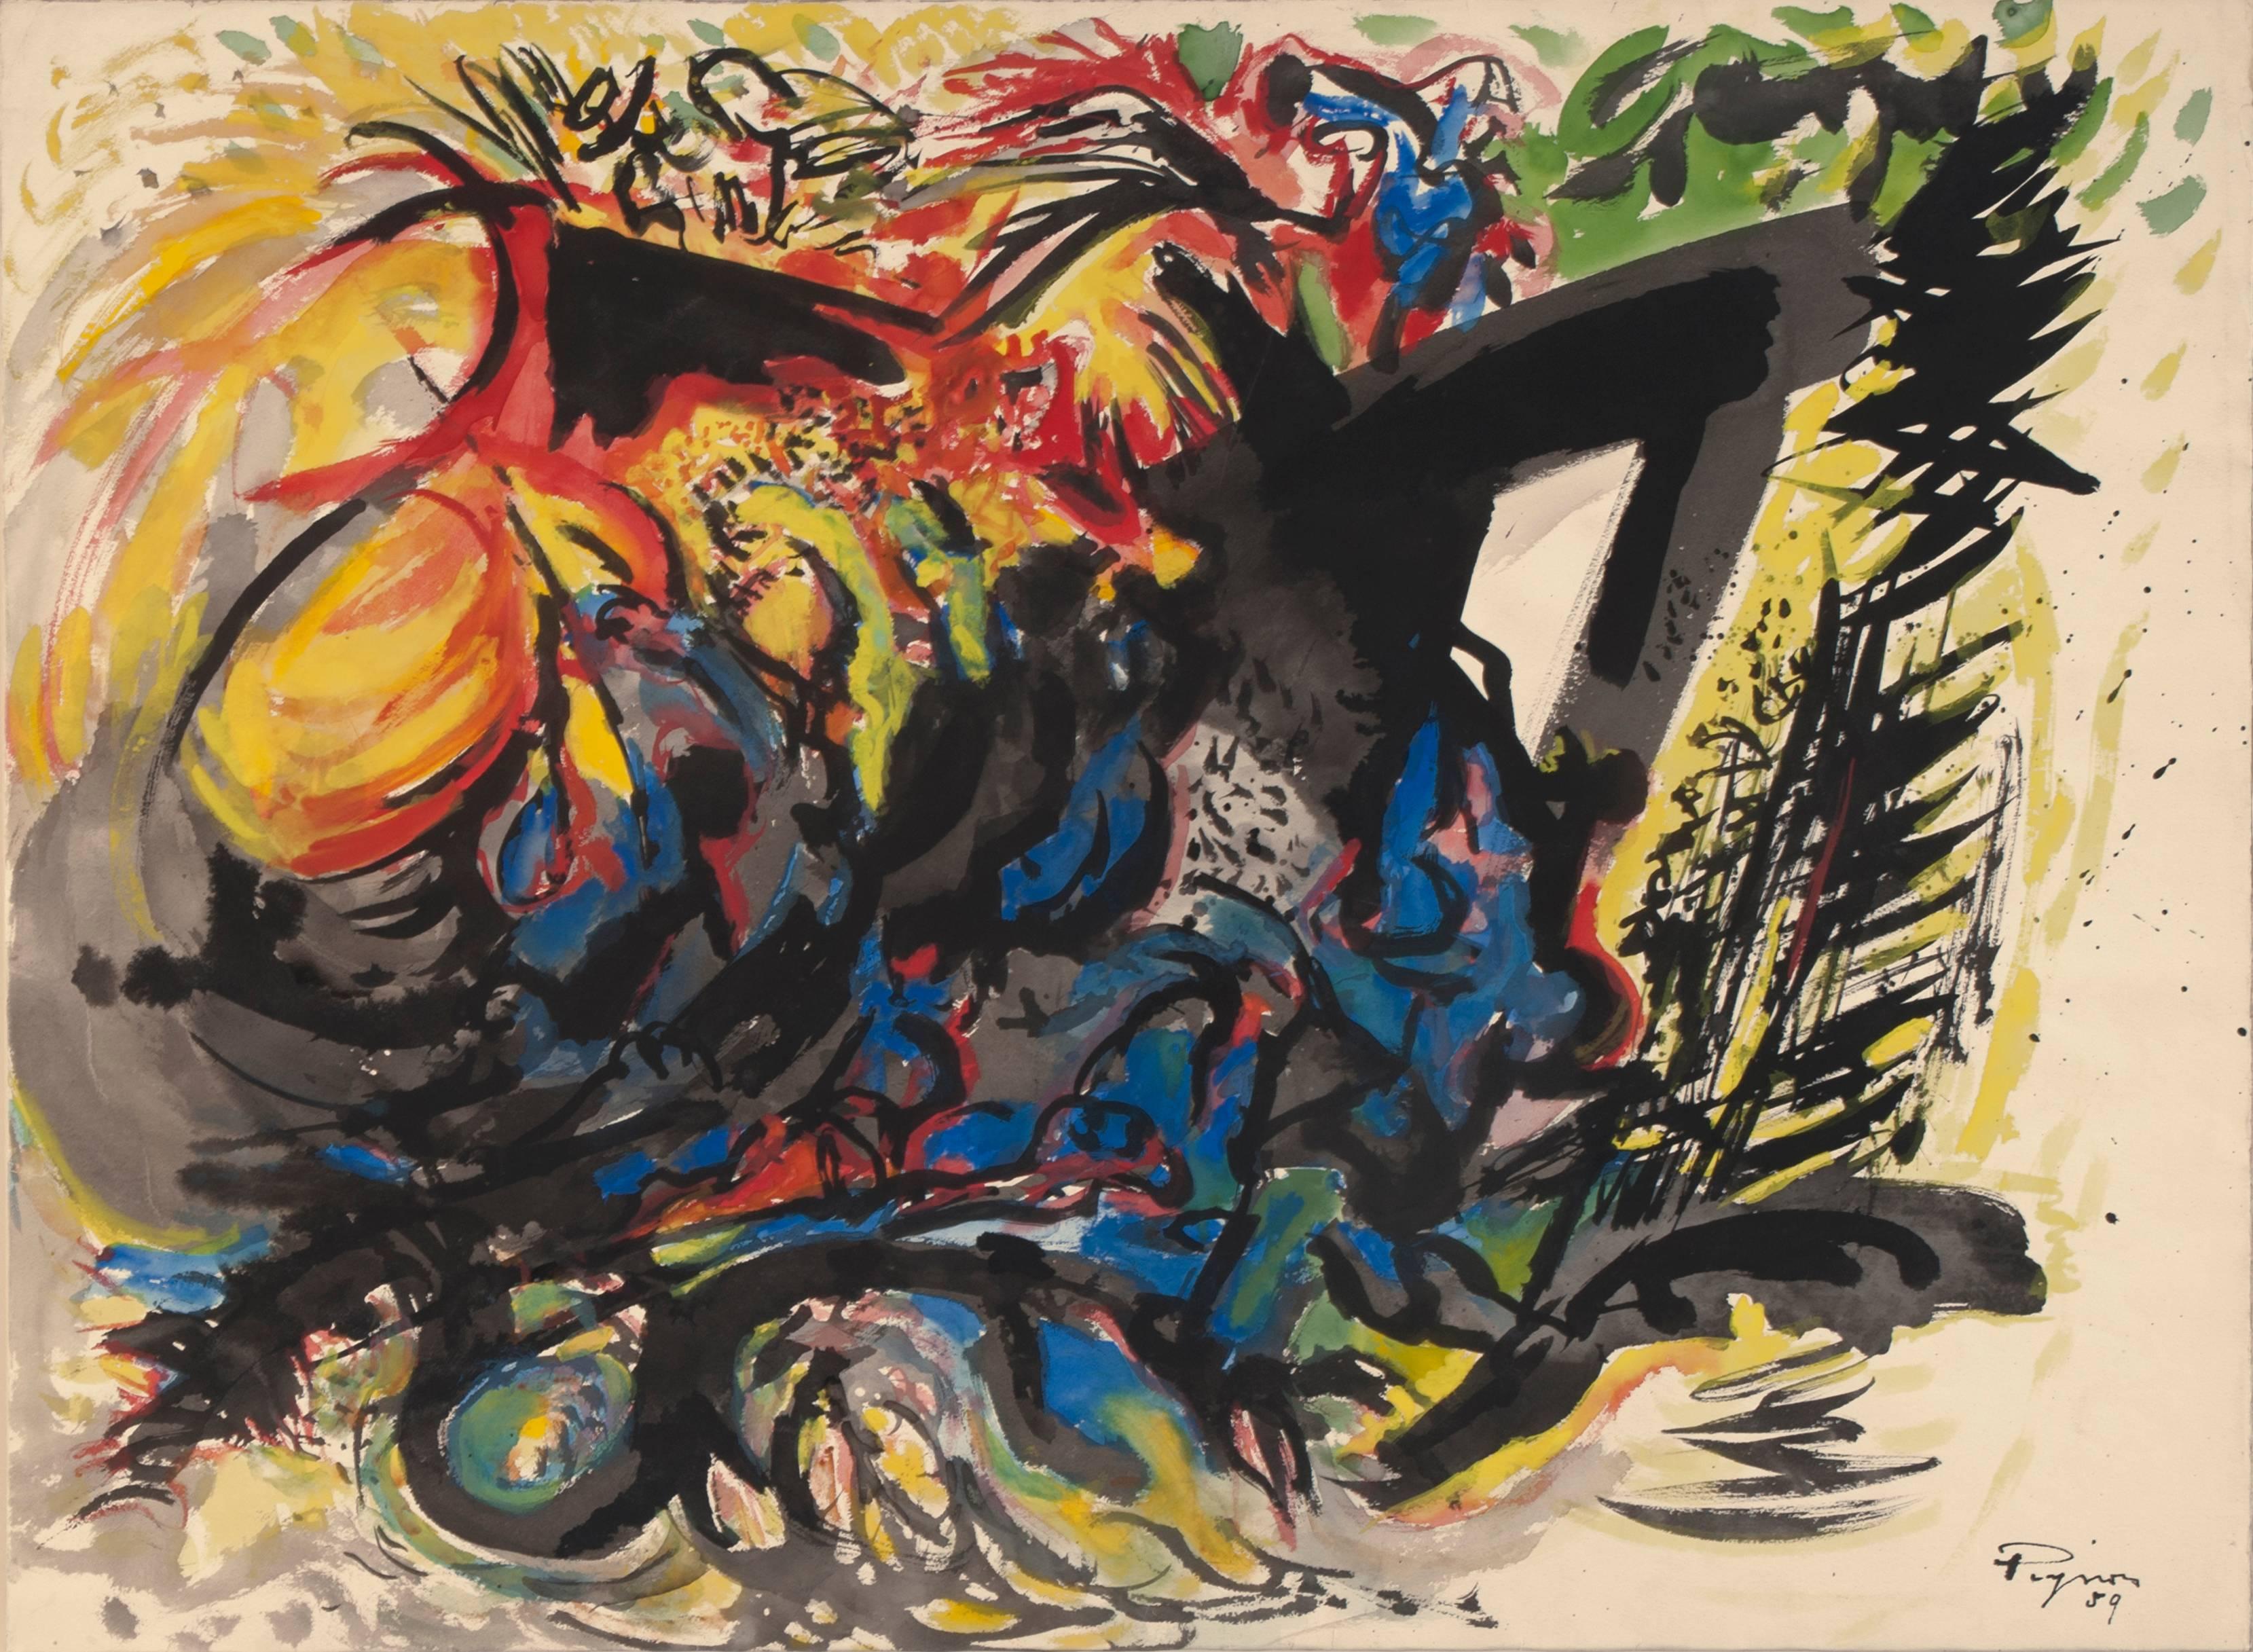 Edouard Pignon (1905 - 1993)
Battage IV, 1959, tempera on paper applied on canvas; signed and dated '59 lower right.

SIZE: cm. 58 x 78
SIZE WITH FRAME: cm. 72 x 92 x 3,5

Provenance:
Ginevra, Swiss, private collection.

Edouard Pignon was born in